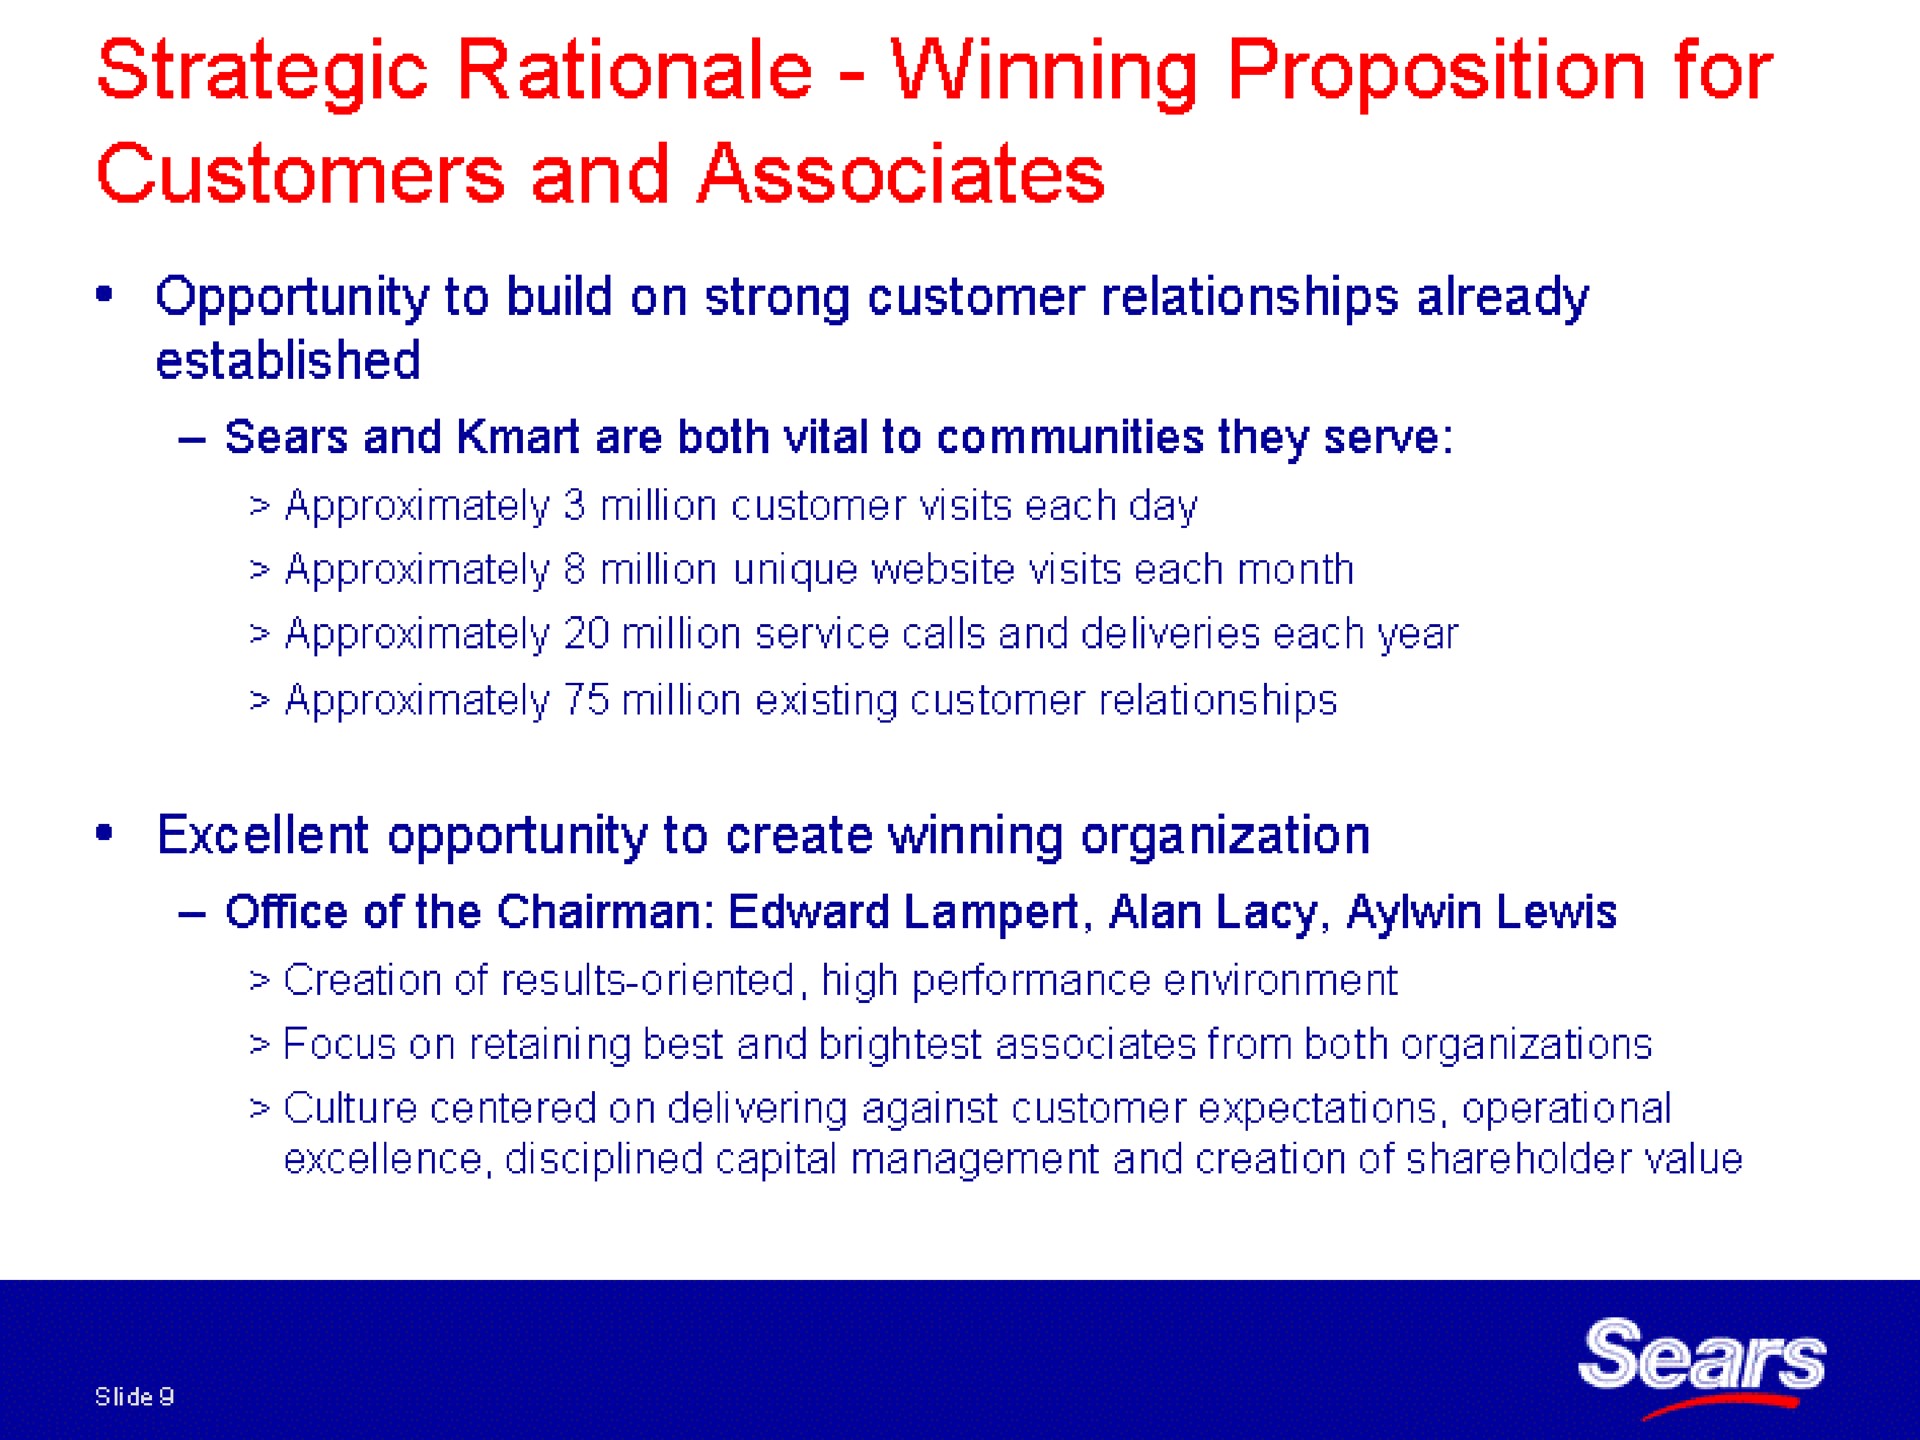 strategic rationale winning proposition for customers and associates | Sears